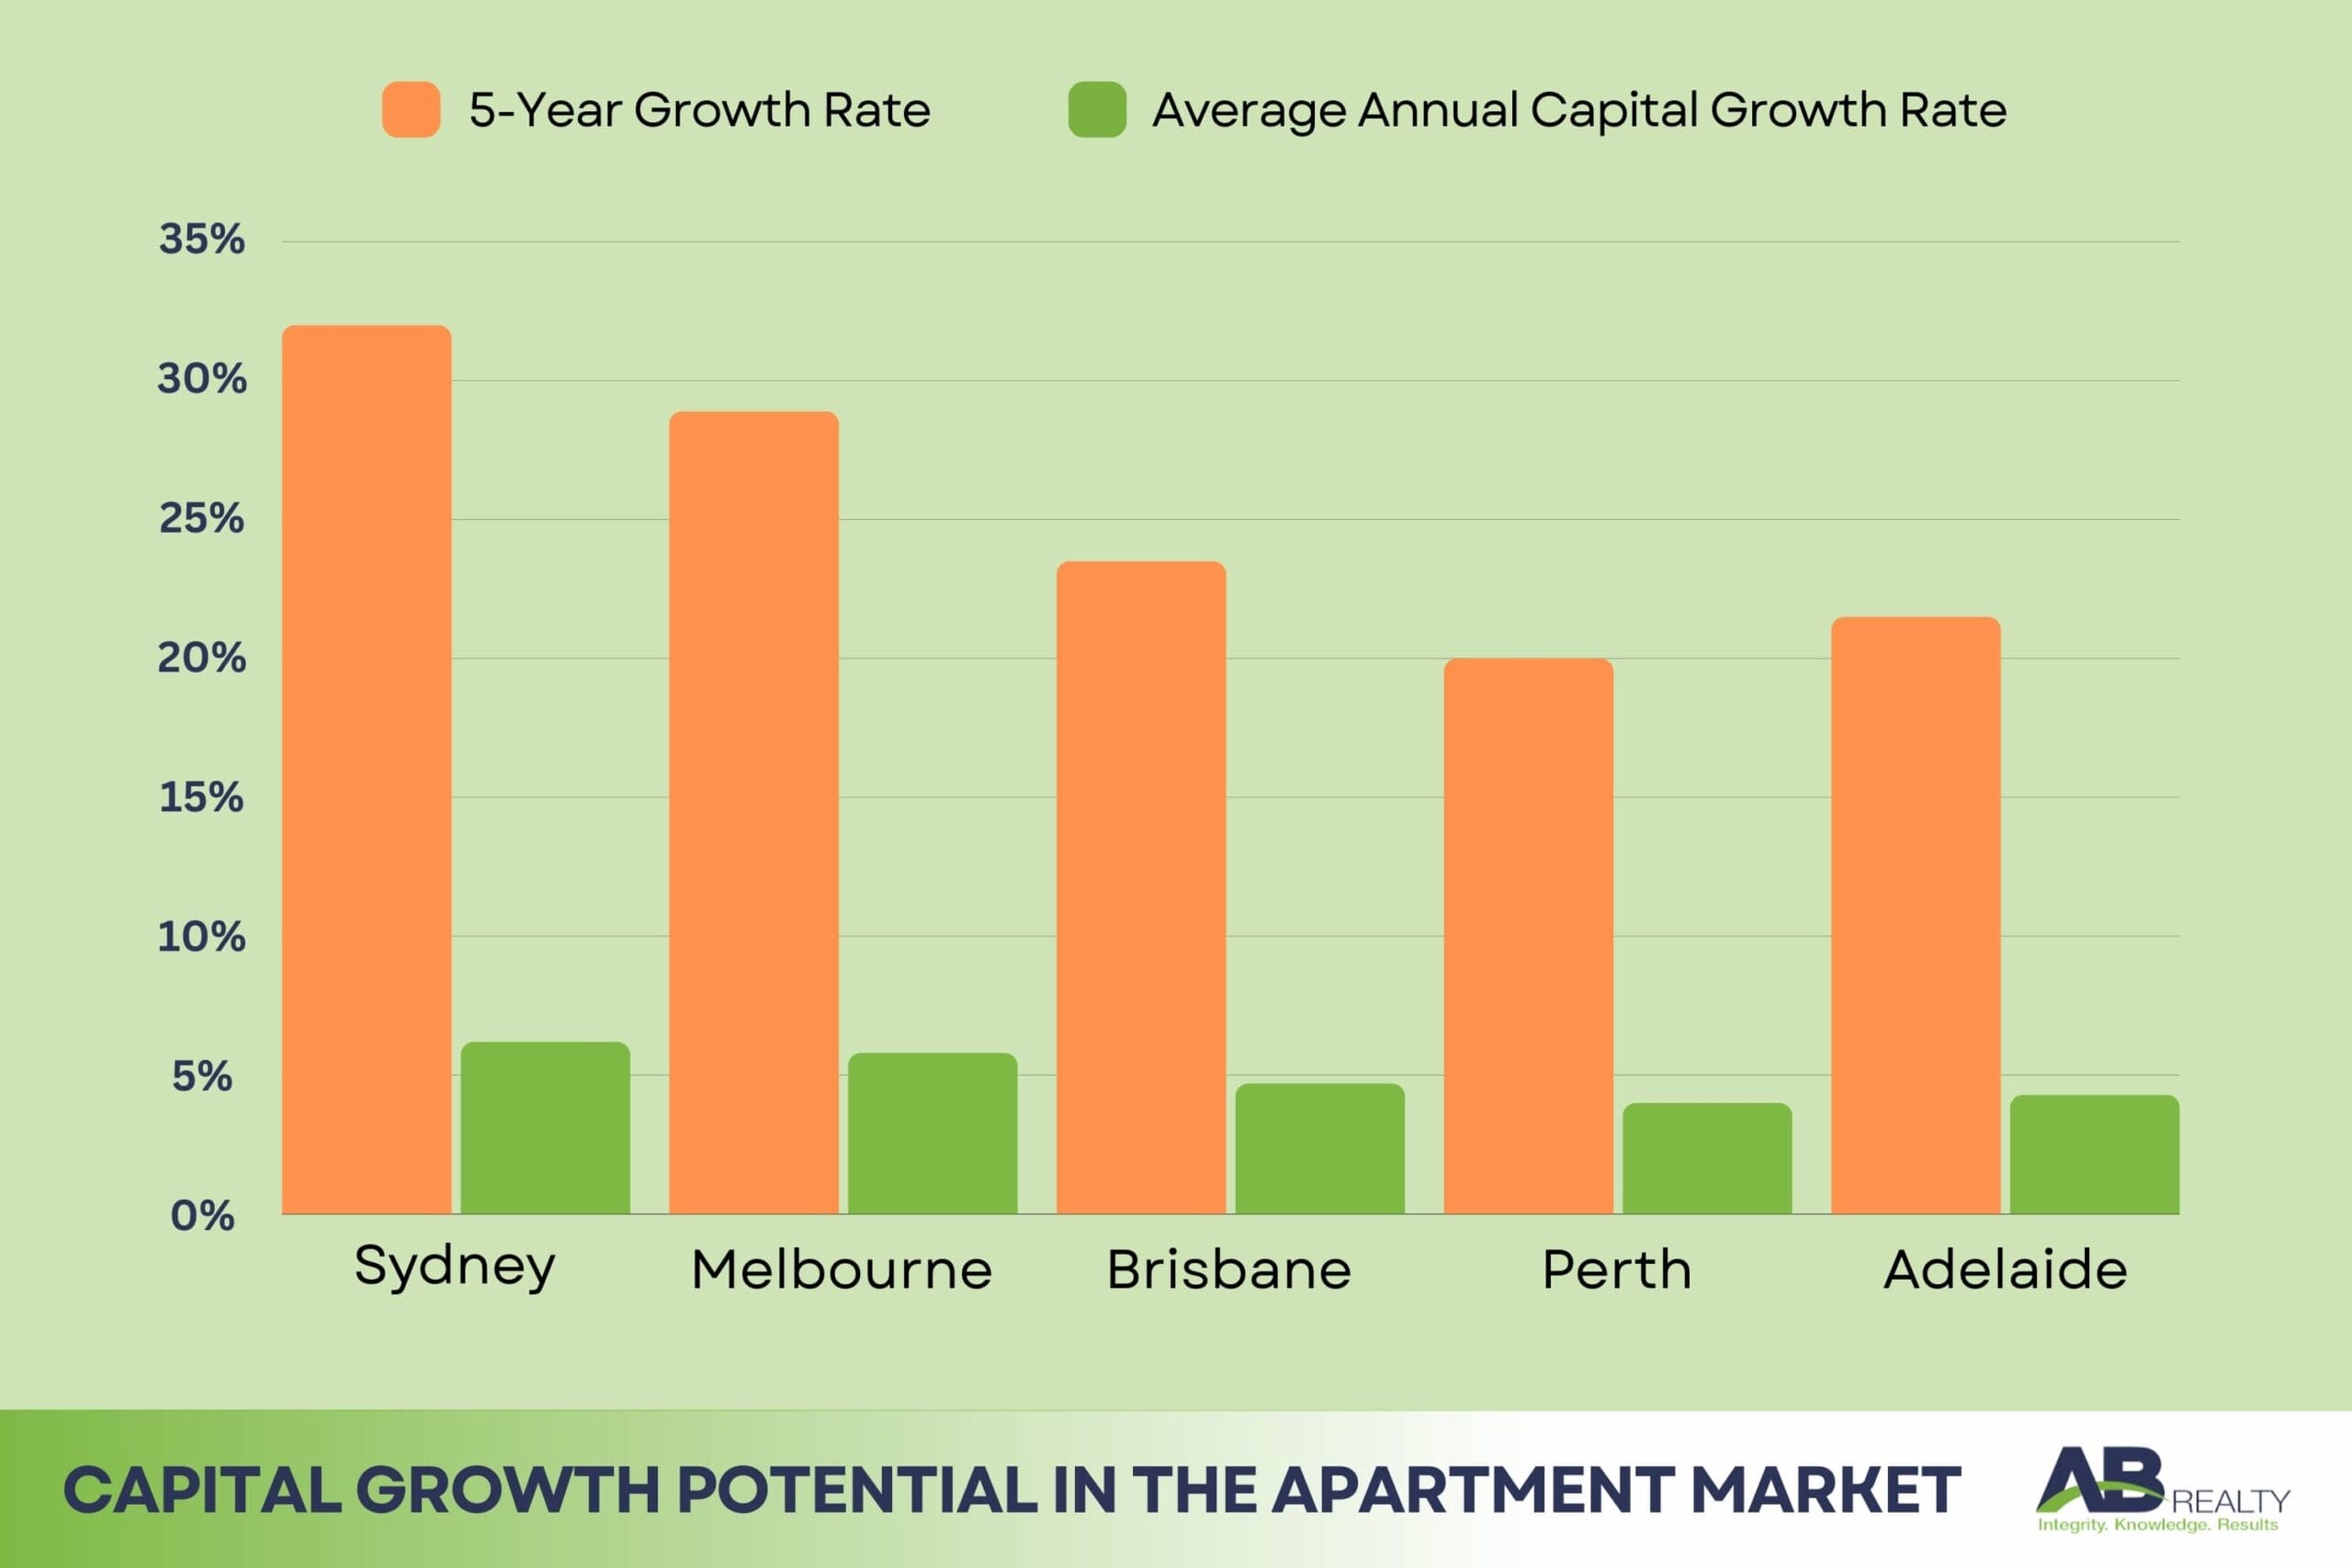 Capital Growth Potential in the Apartment Market